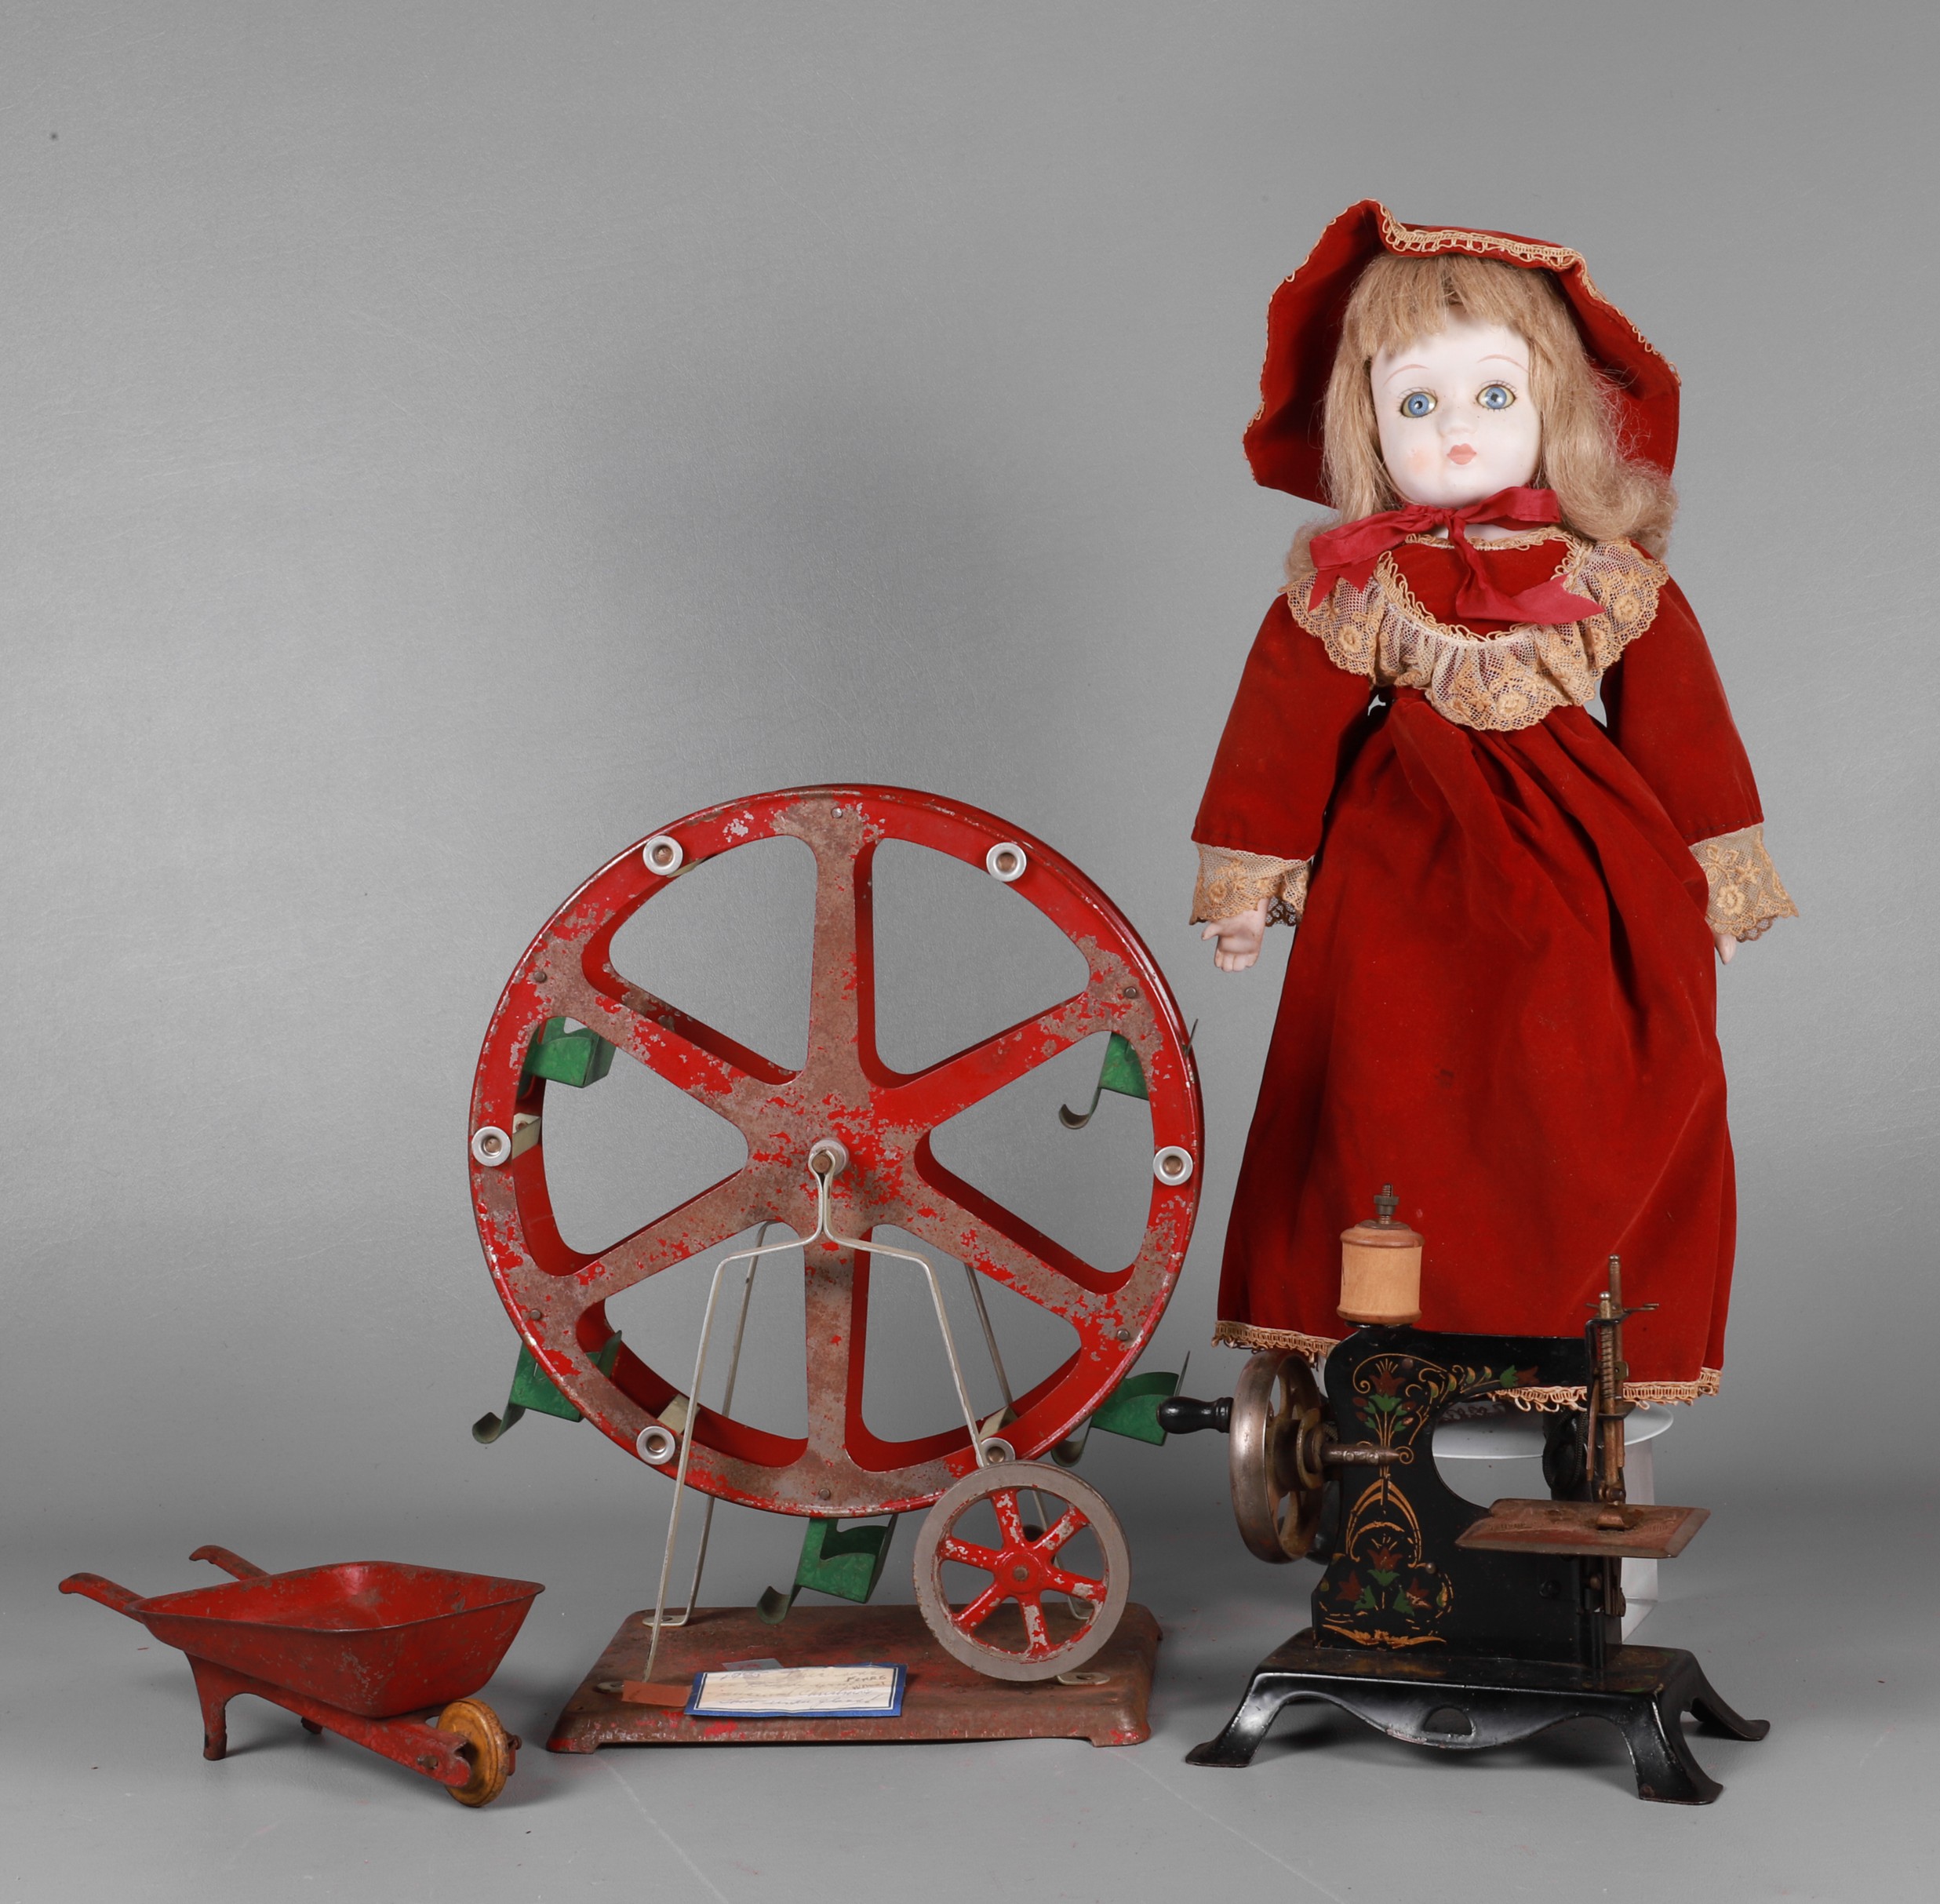 Doll, tin toys and sewing machine